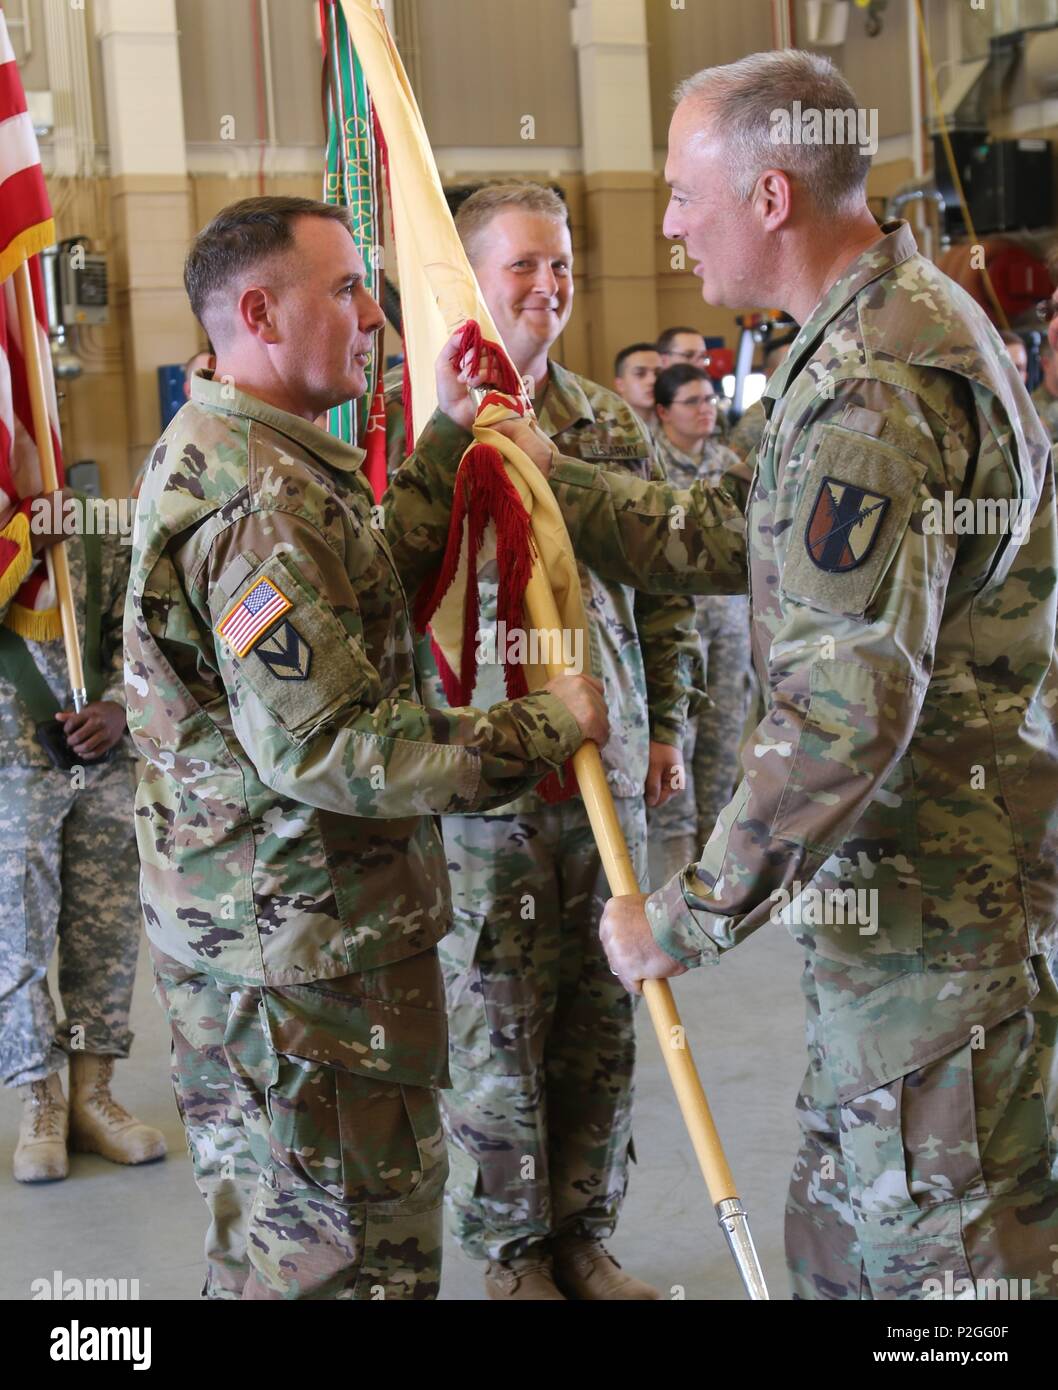 Lt. Col. Peter F. Gleason, a Tracy, California resident and 63rd Brigade Support Battalion incoming commander, is passed the unit guidon from Col. Joseph Riciardi, 303rd Maneuver Enhancement Brigade commander, and assumed command of the 63rd BSB from Lt. Col. Debra A. Cisney, who has led the unit for the past two years, at the George W. Dunaway Army Reserve Center in Sloan, Nev. September 10. Stock Photo